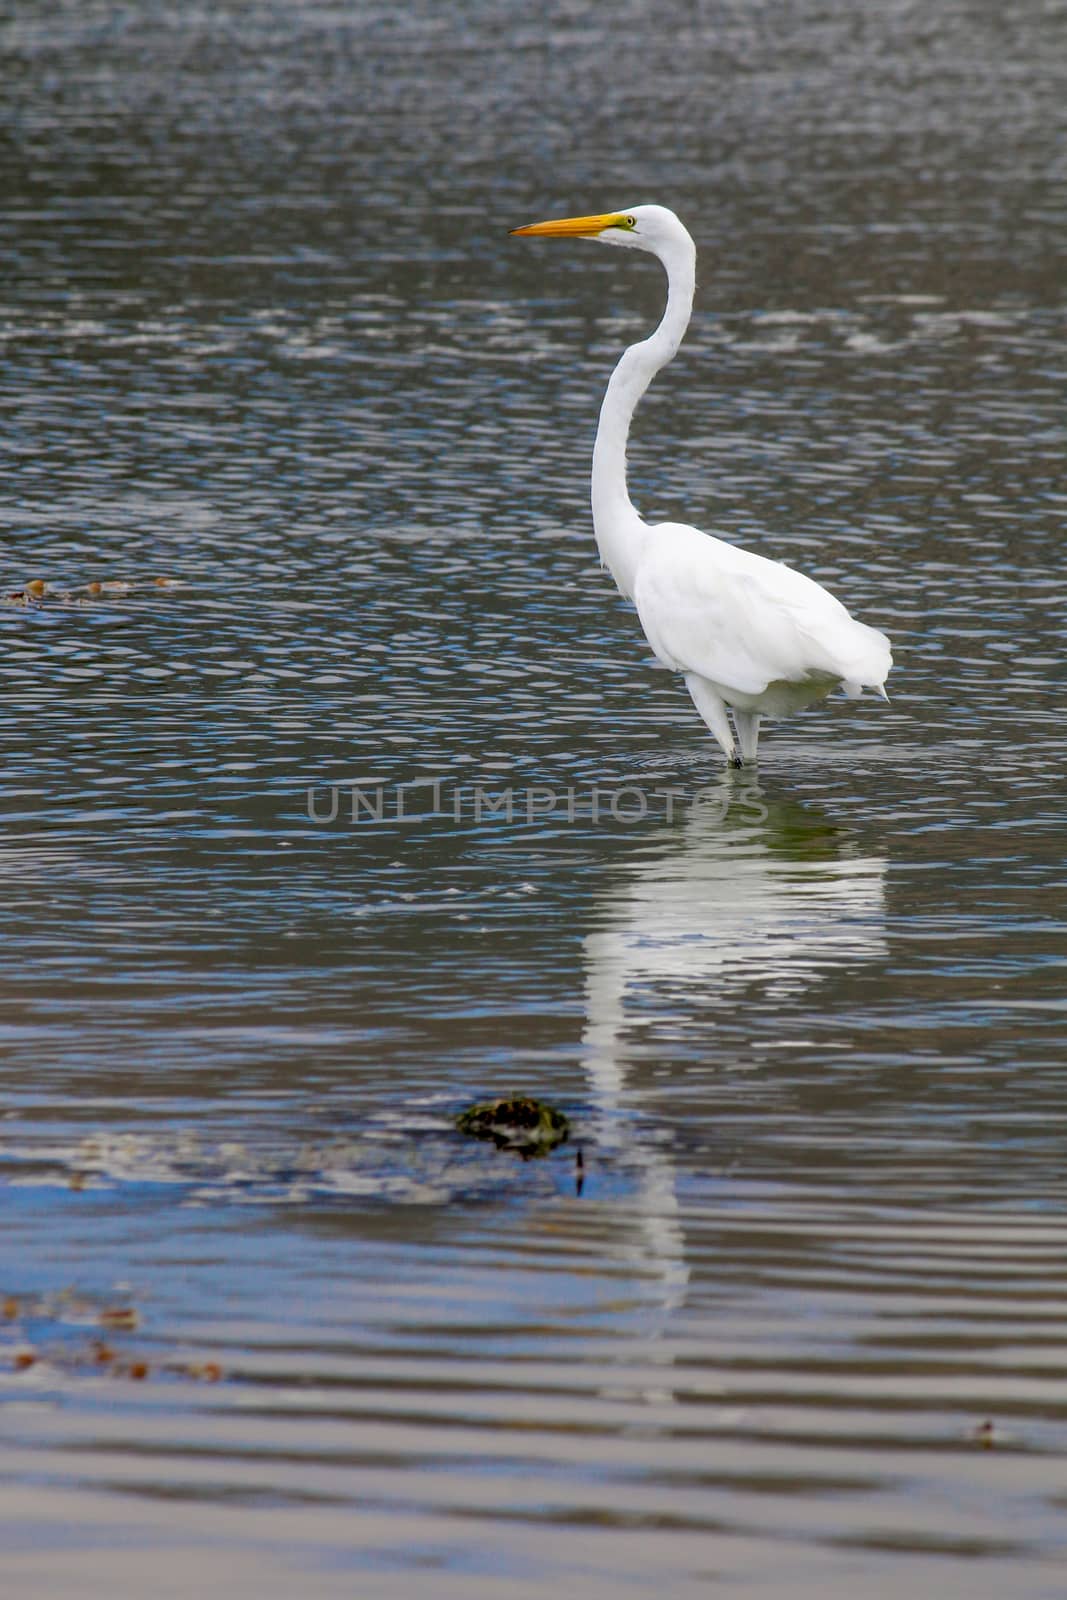 The Great Egret on the Water at Malibu Beach in August